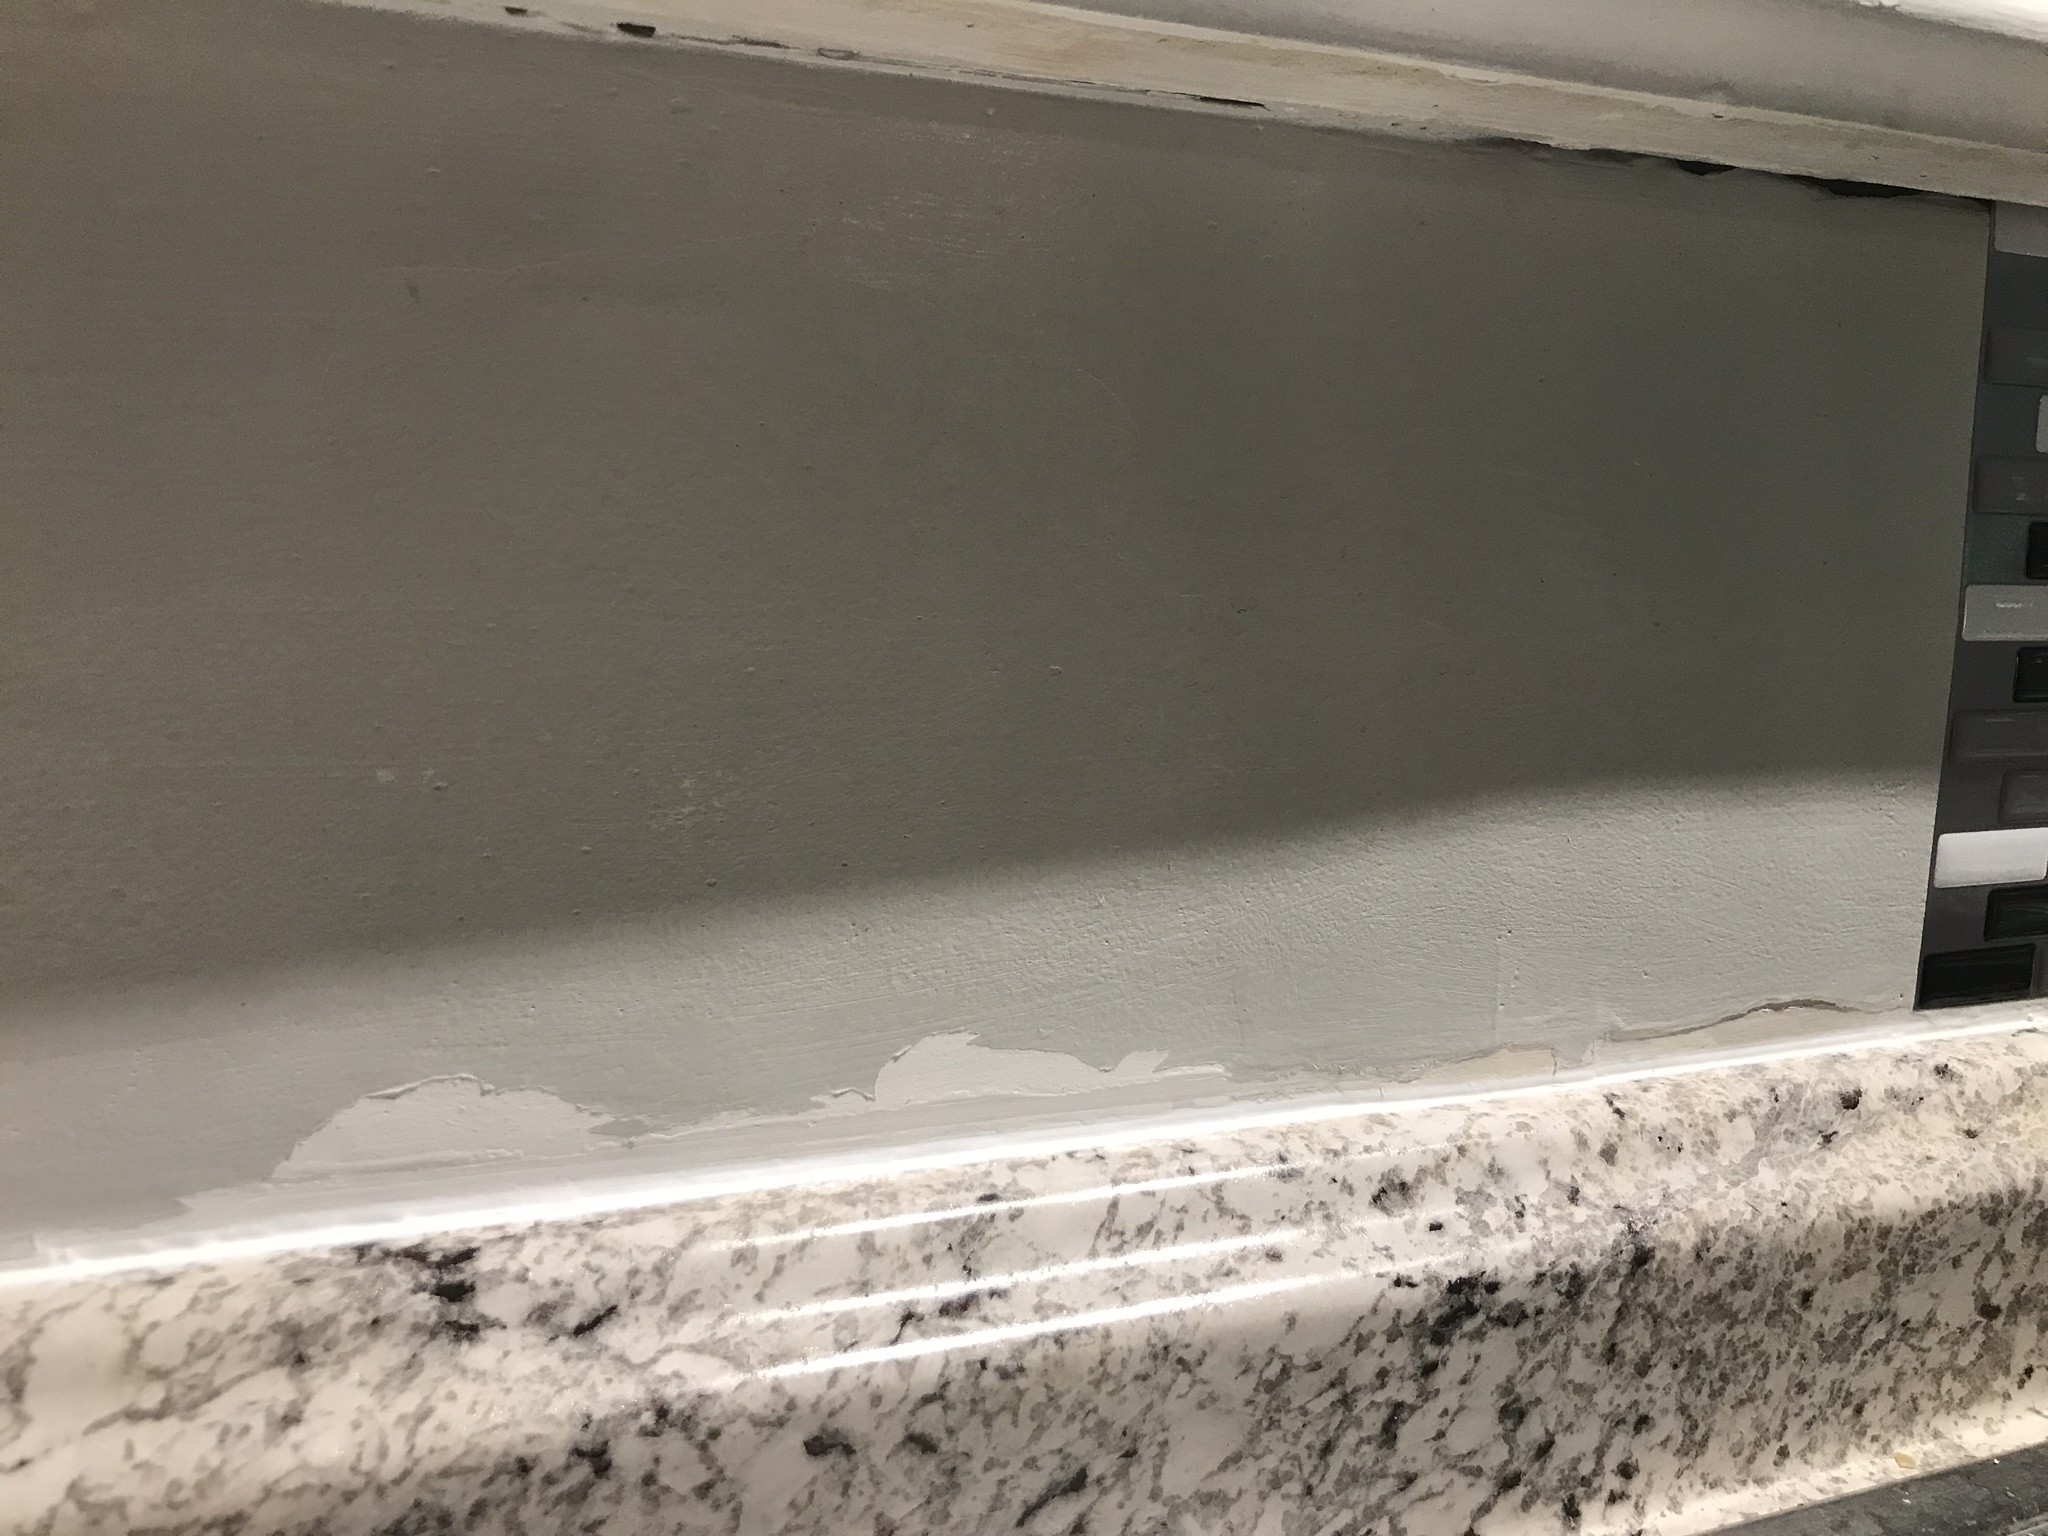 area behind sink with peeling paint